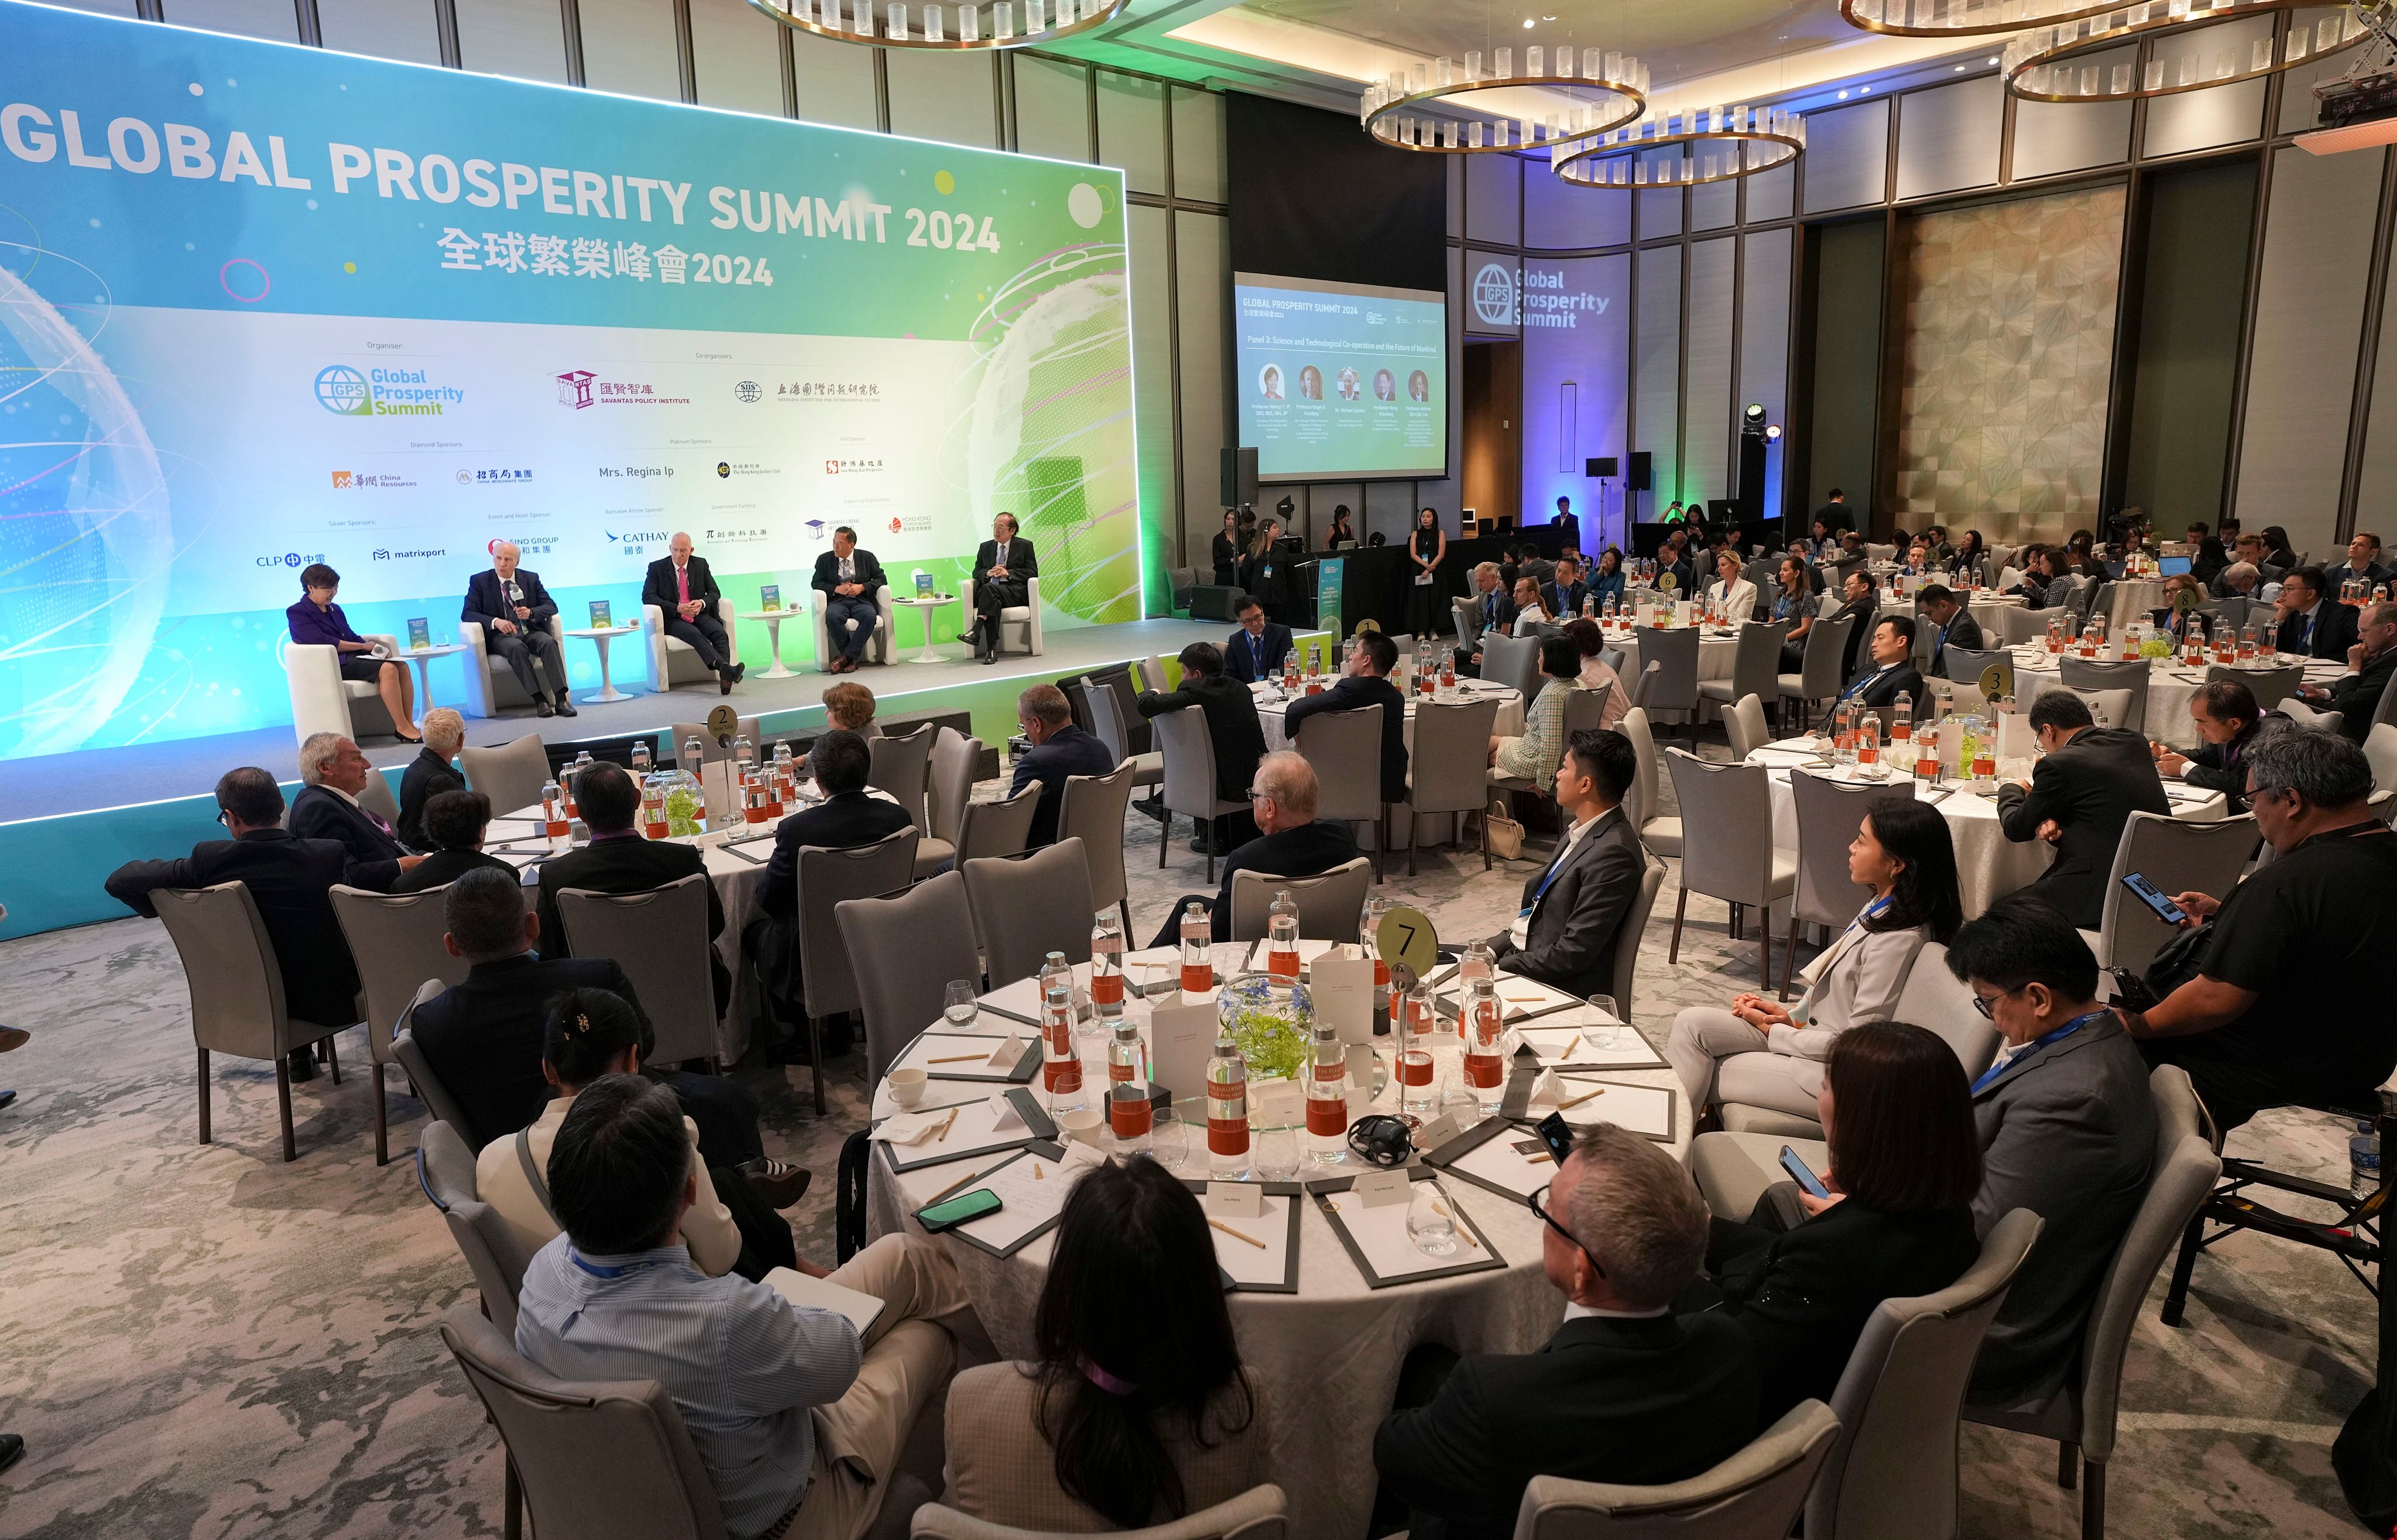 The themes of the Global Prosperity Summit include globalisation, cooperation in science and technology and climate change, among others. Photos: Elson Li